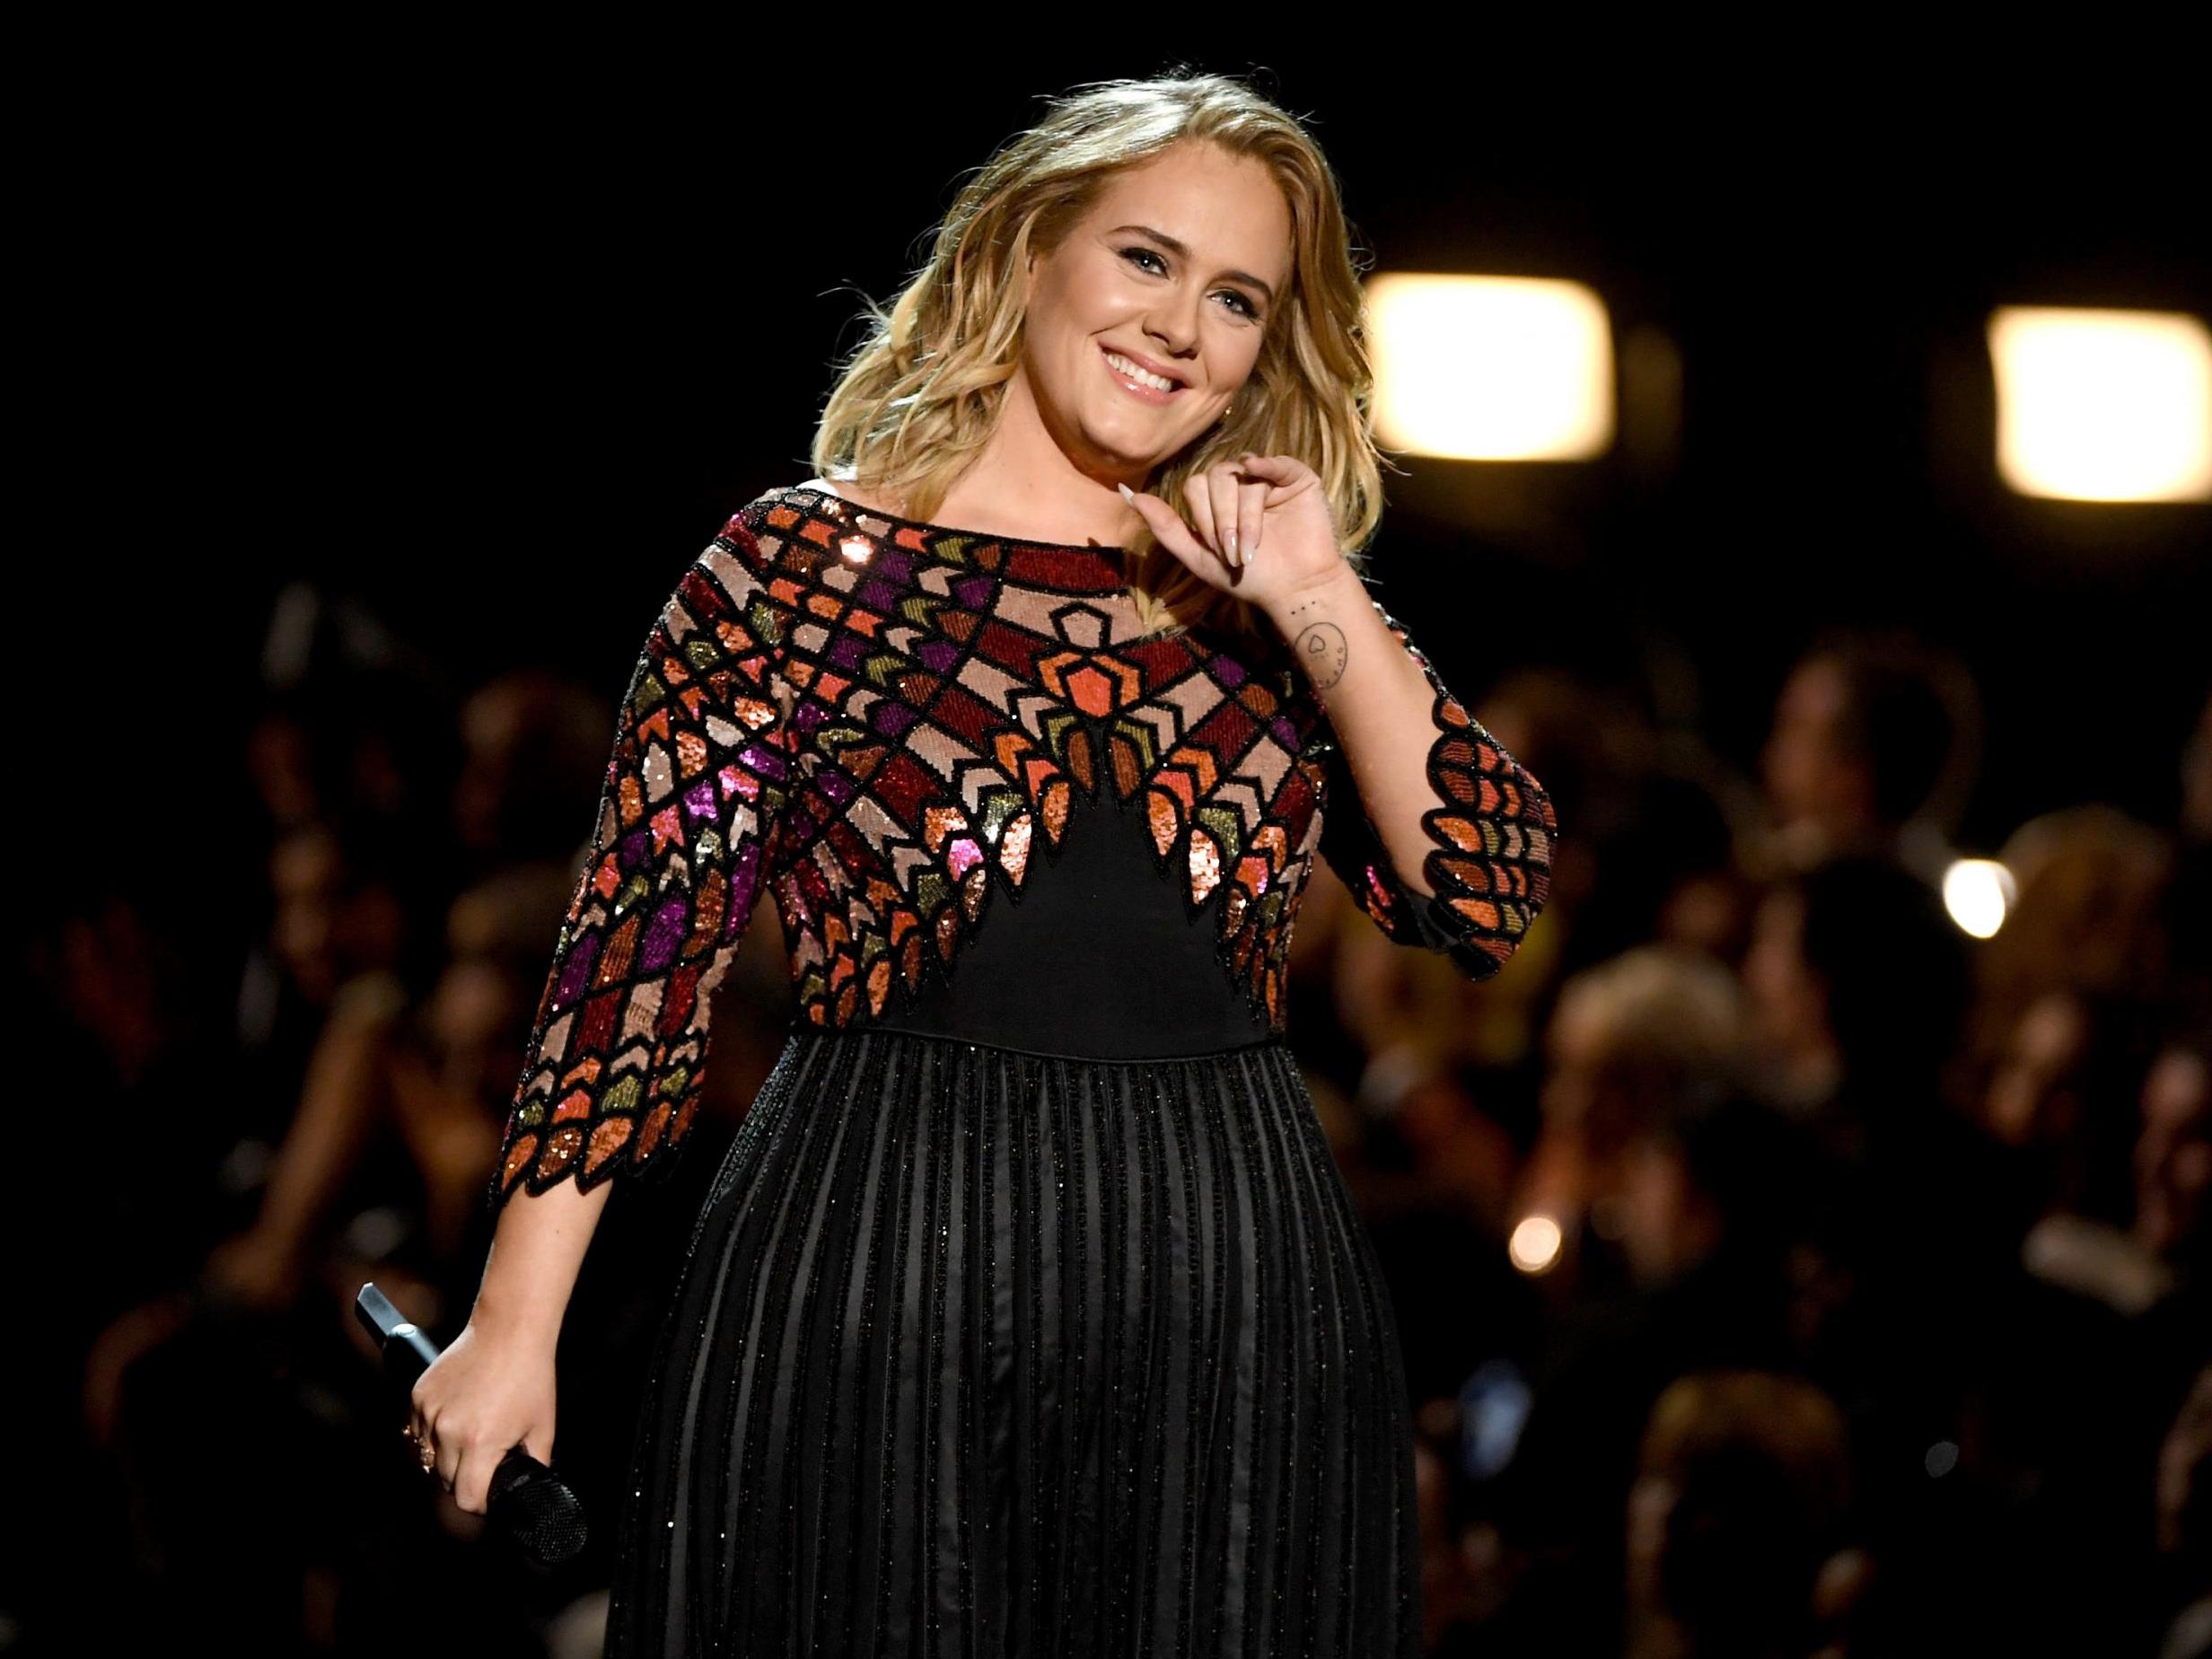 Adele has a powerhouse, once-in-a-generation voice, now with an additional four notes